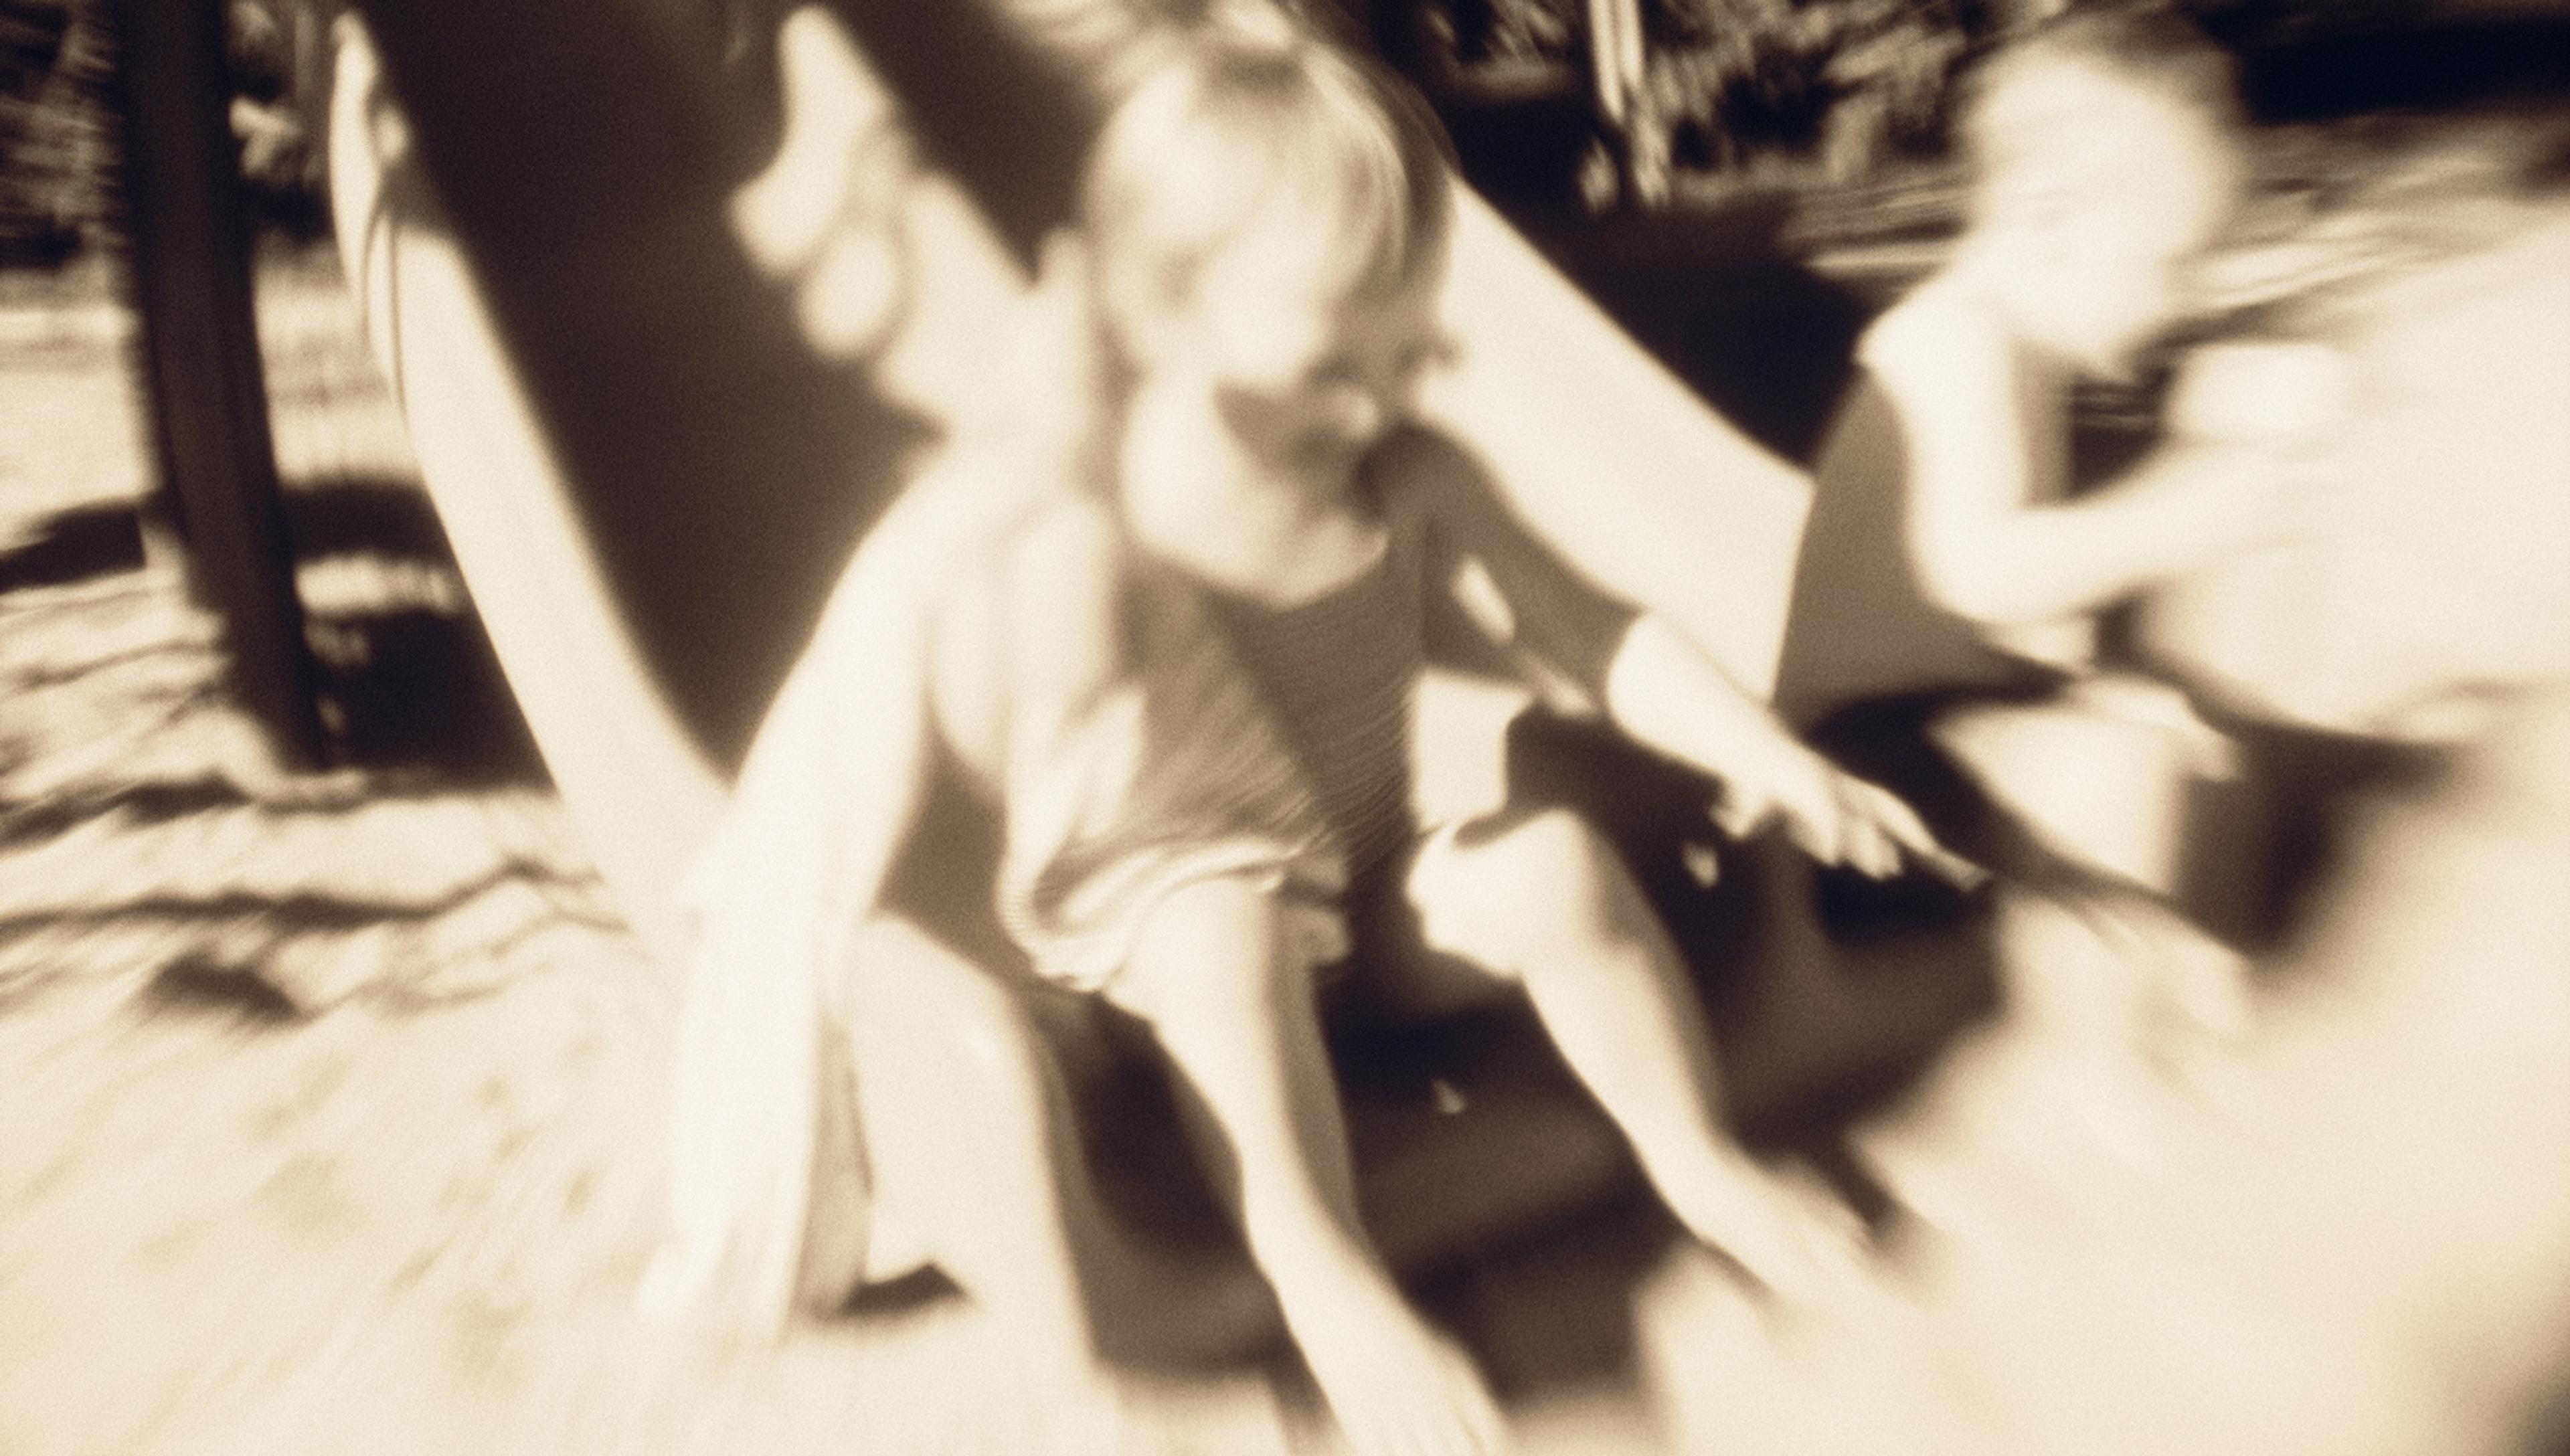 Two children come down a slide in a sepia-toned photo